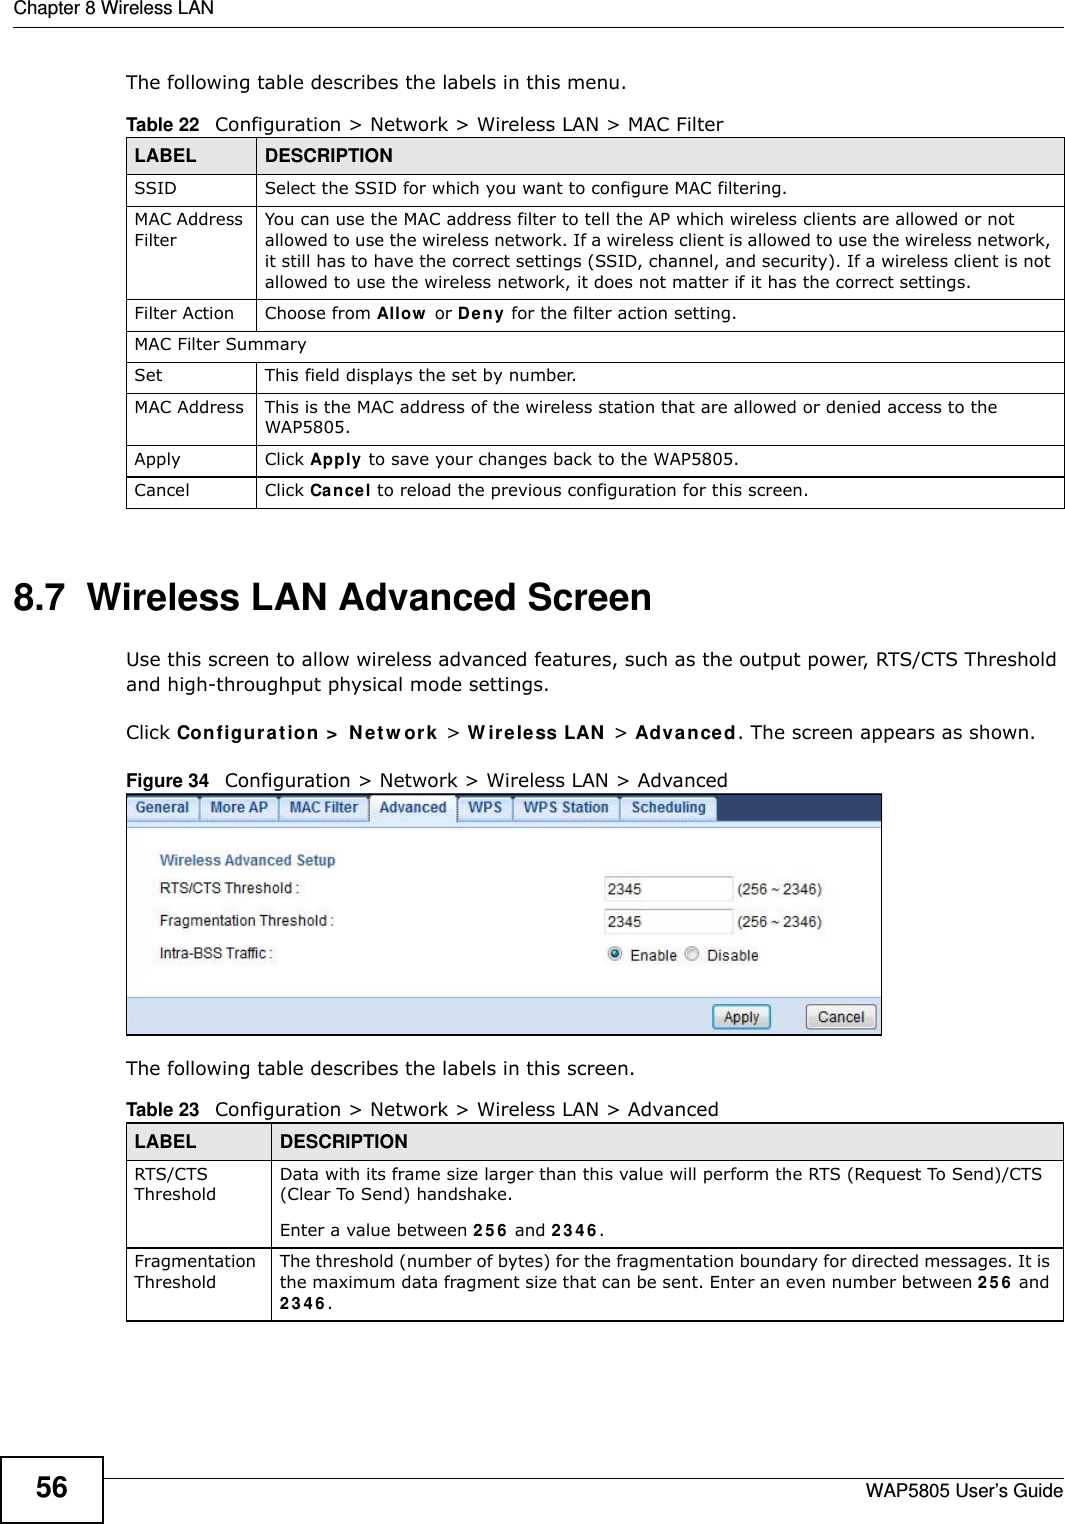 Chapter 8 Wireless LANWAP5805 User’s Guide56The following table describes the labels in this menu.8.7  Wireless LAN Advanced Screen  Use this screen to allow wireless advanced features, such as the output power, RTS/CTS Threshold and high-throughput physical mode settings.Click Configuration &gt; Network &gt; Wireless LAN &gt; Advanced. The screen appears as shown.Figure 34   Configuration &gt; Network &gt; Wireless LAN &gt; AdvancedThe following table describes the labels in this screen. Table 22   Configuration &gt; Network &gt; Wireless LAN &gt; MAC FilterLABEL DESCRIPTIONSSID Select the SSID for which you want to configure MAC filtering.MAC Address FilterYou can use the MAC address filter to tell the AP which wireless clients are allowed or not allowed to use the wireless network. If a wireless client is allowed to use the wireless network, it still has to have the correct settings (SSID, channel, and security). If a wireless client is not allowed to use the wireless network, it does not matter if it has the correct settings.Filter Action Choose from Allow or Deny for the filter action setting.MAC Filter SummarySet This field displays the set by number.MAC Address This is the MAC address of the wireless station that are allowed or denied access to the WAP5805.Apply Click Apply to save your changes back to the WAP5805.Cancel Click Cancel to reload the previous configuration for this screen.Table 23   Configuration &gt; Network &gt; Wireless LAN &gt; AdvancedLABEL DESCRIPTIONRTS/CTS ThresholdData with its frame size larger than this value will perform the RTS (Request To Send)/CTS (Clear To Send) handshake. Enter a value between 256 and 2346. Fragmentation ThresholdThe threshold (number of bytes) for the fragmentation boundary for directed messages. It is the maximum data fragment size that can be sent. Enter an even number between 256 and 2346.